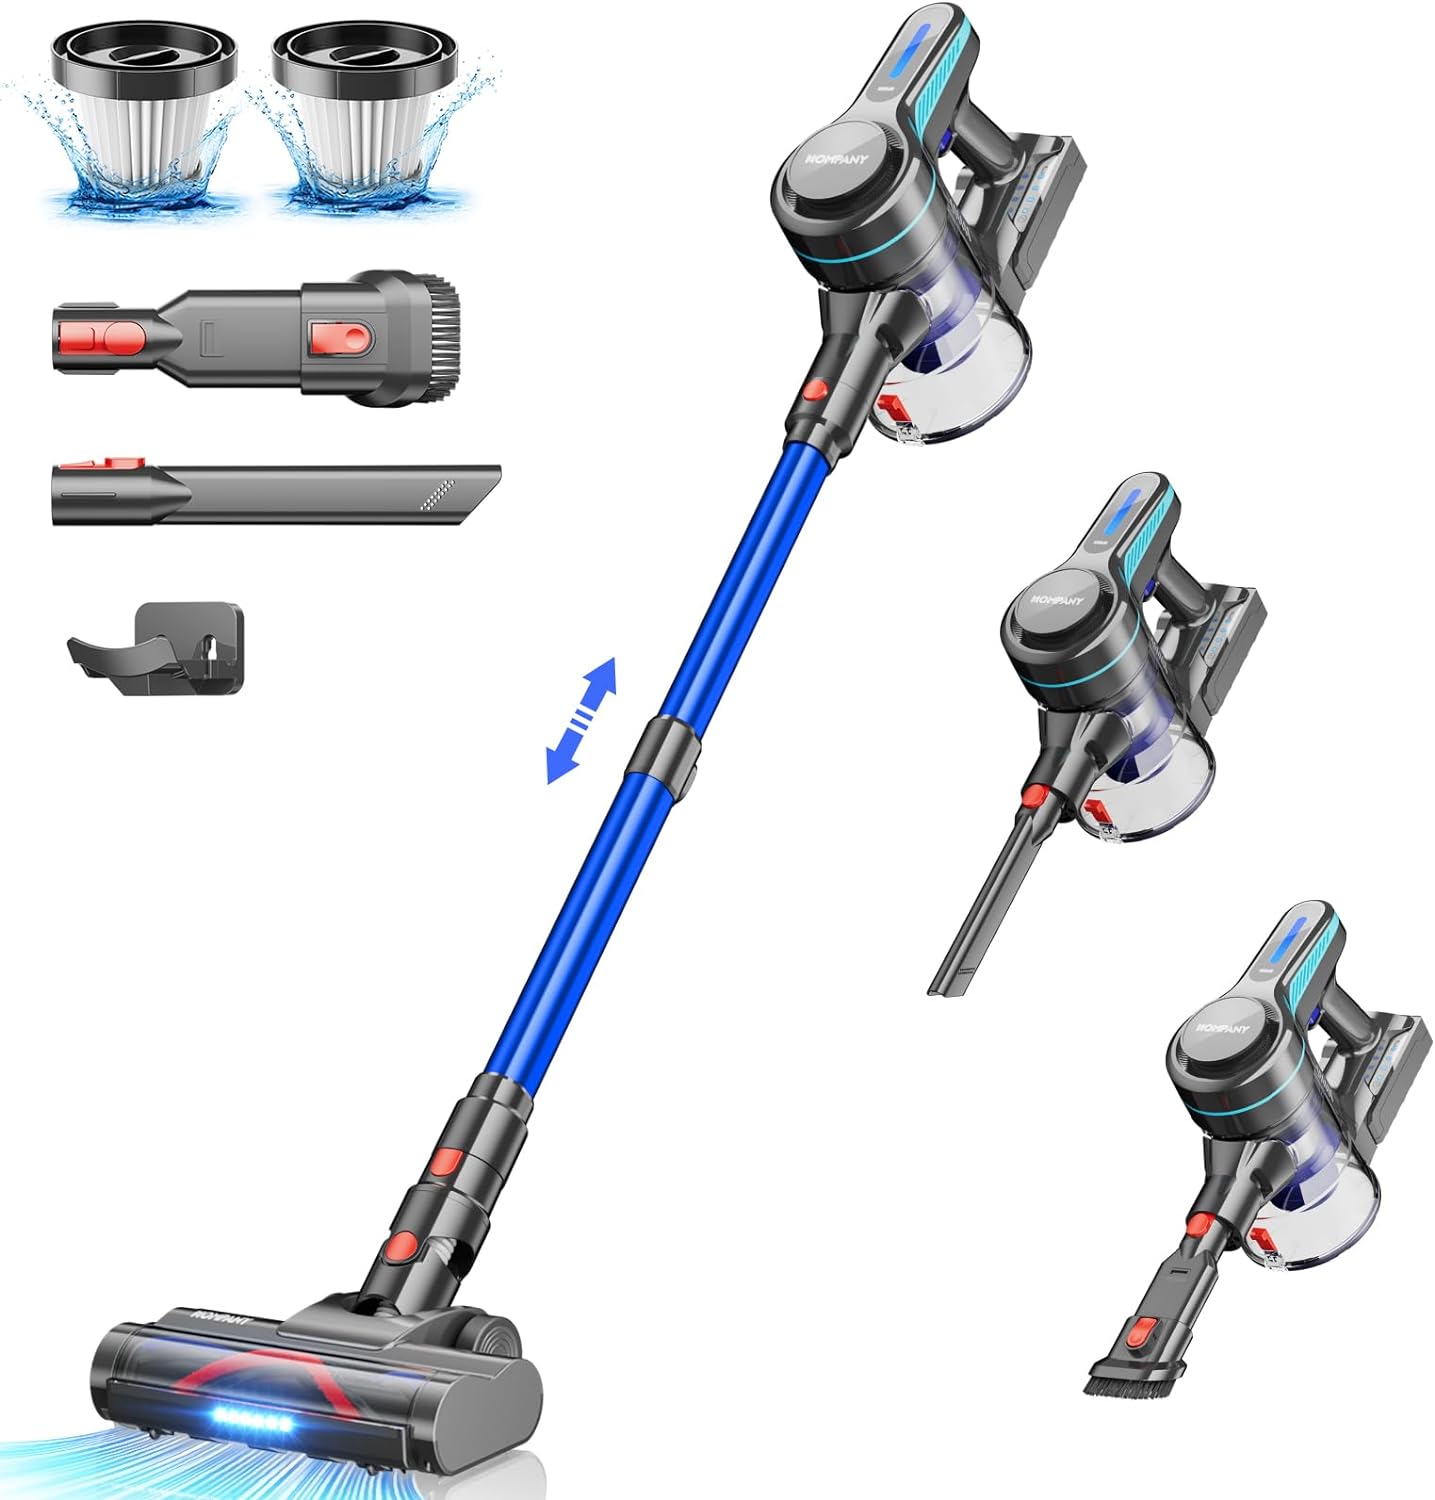 Finally a simple well built vacuum that does a wonderful job. It picks up well on hard surface and on my carpet which has medium pile. I have 3 cats and its perfect. I vacuum everyday and the vacuum is lite and is all I wanted or need. Very happy, plus price was very reasonable and less than most :)